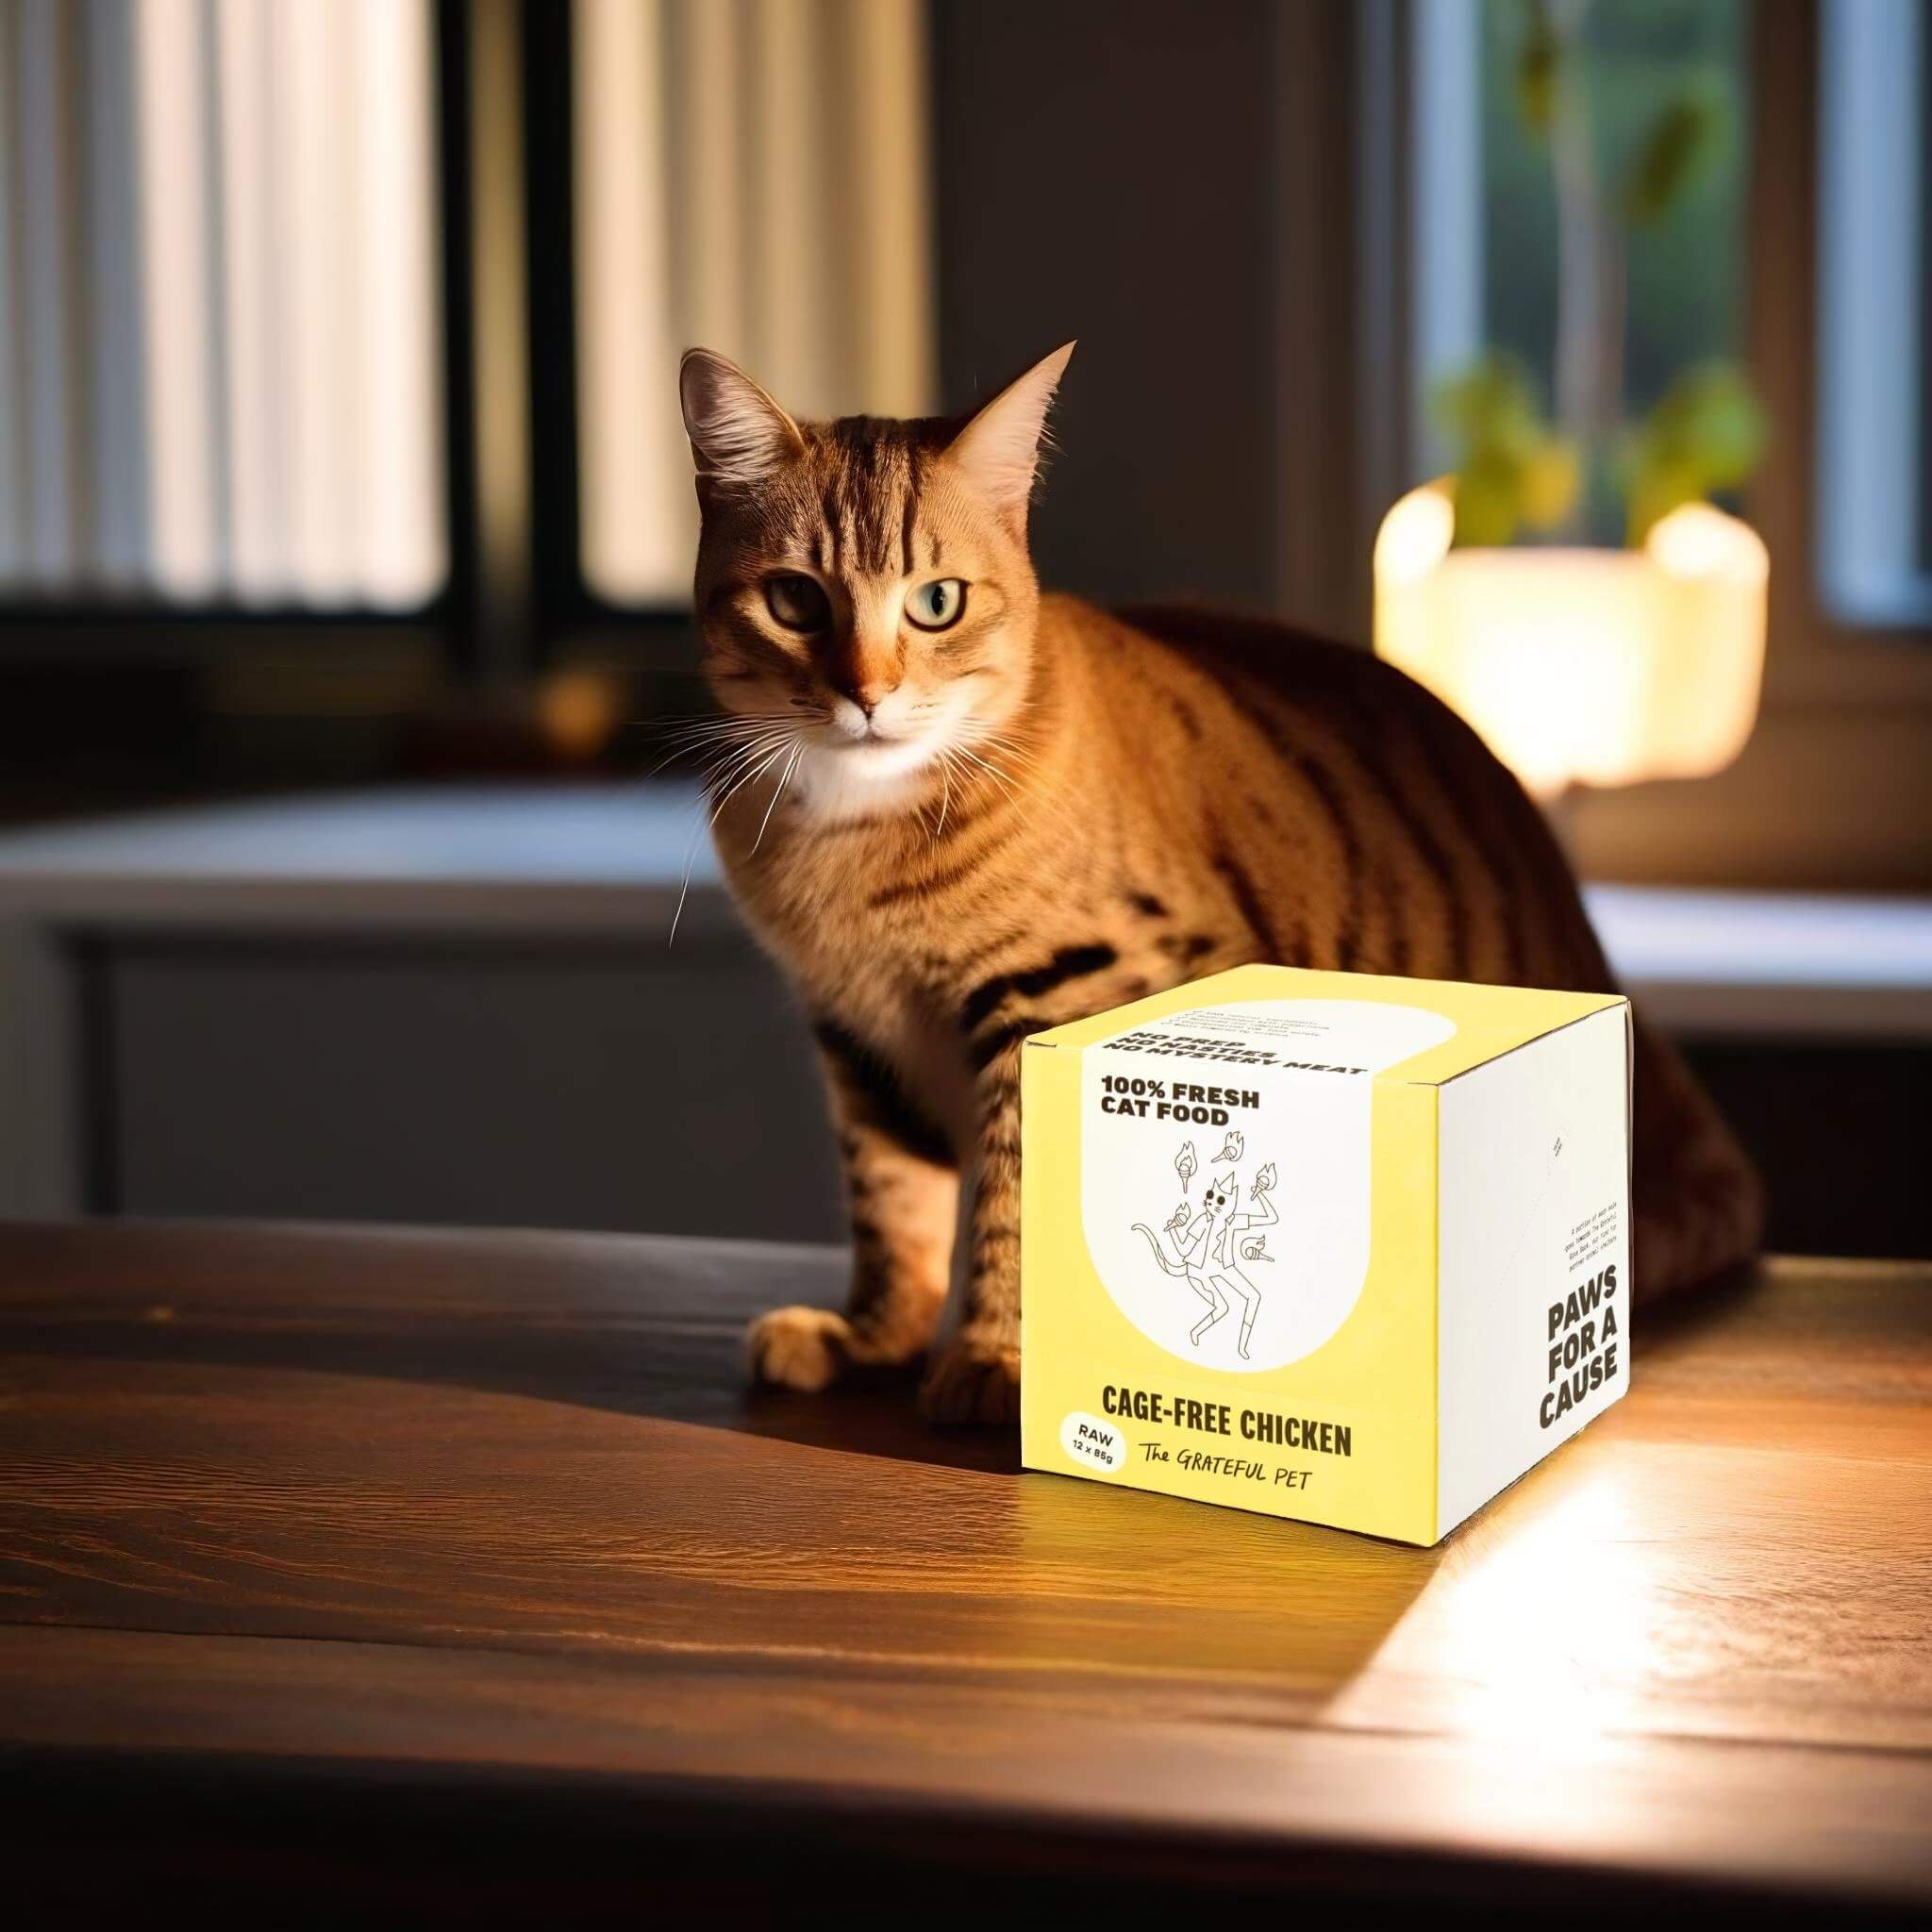 A product standing on a wooden table, beside a cat